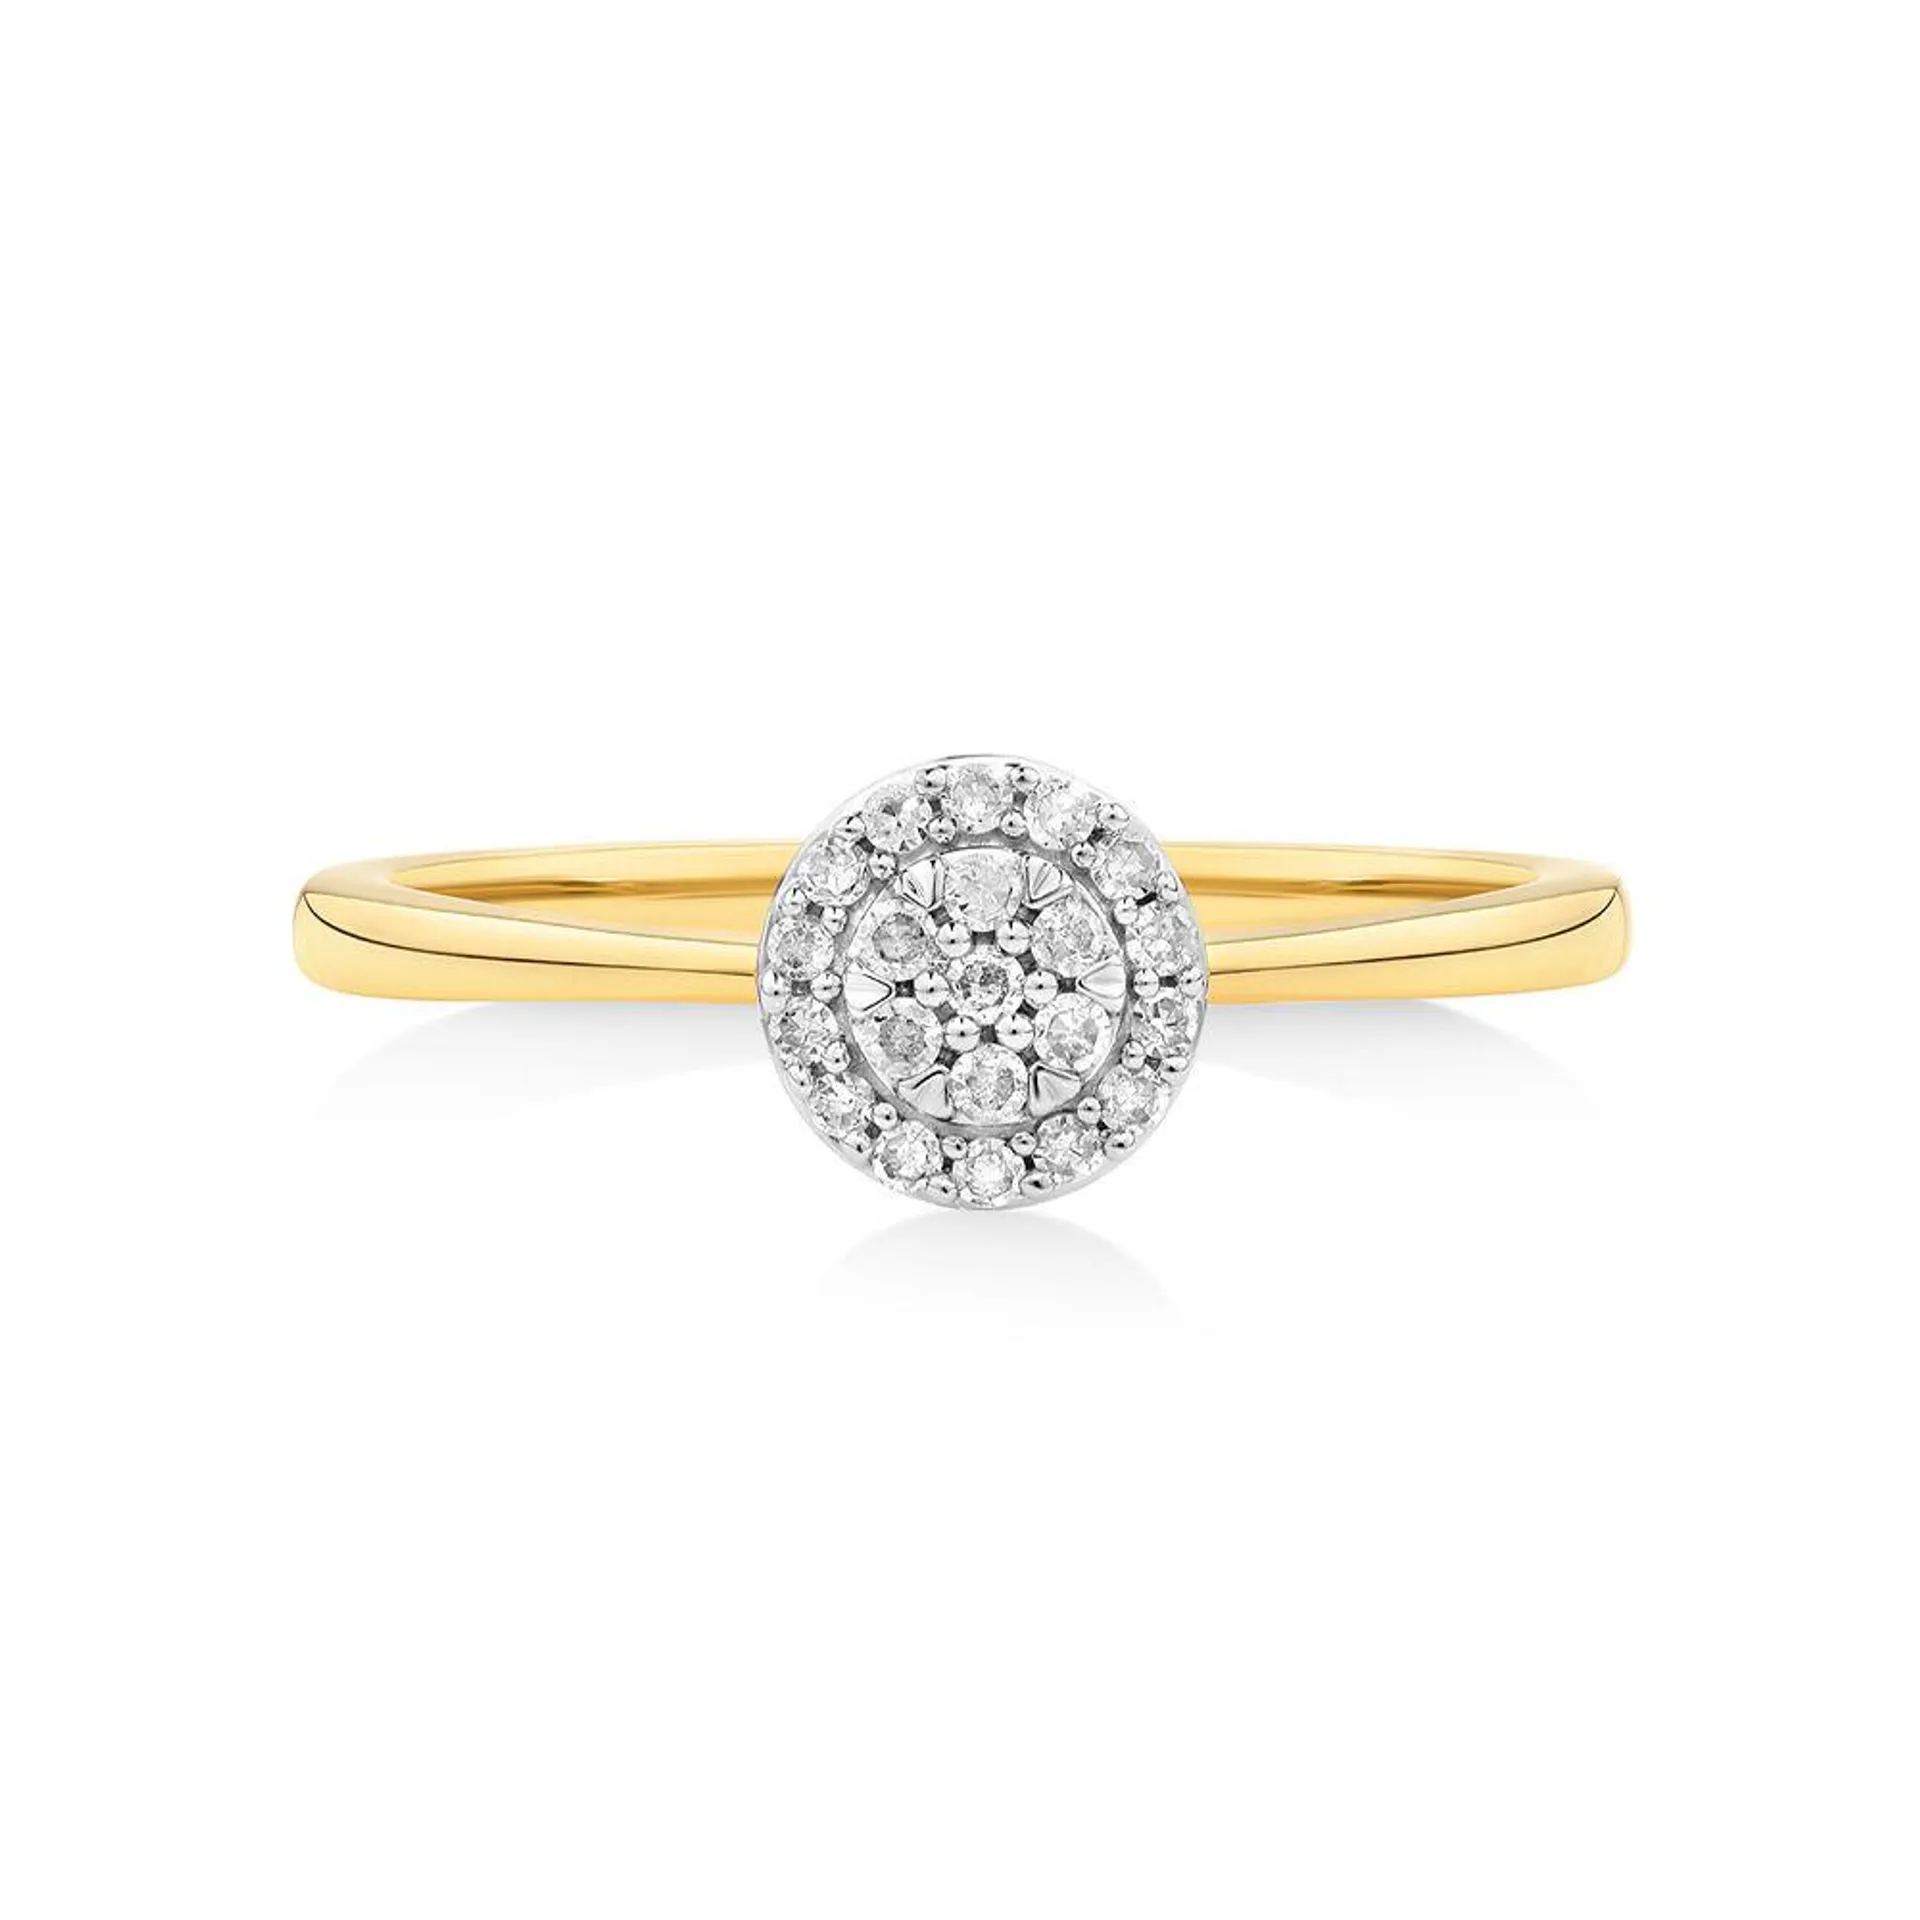 0.10 Carat TW Round Cluster Diamond Promise Ring in 10kt Yellow and White Gold